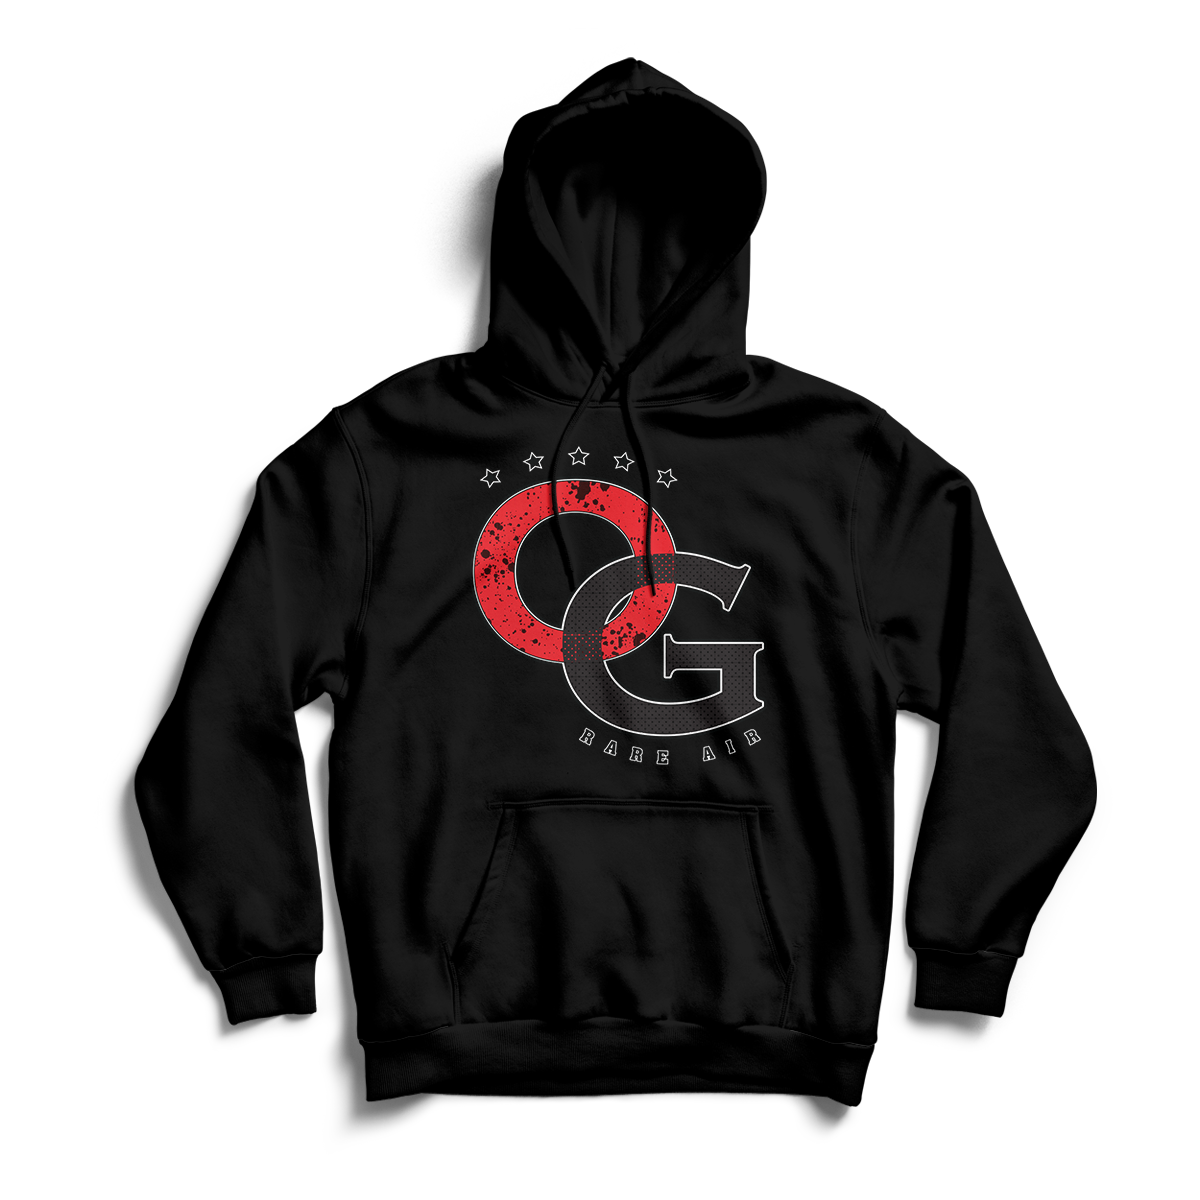 'OG Rare Air' in Bred 11 Unisex Pullover Hoodie